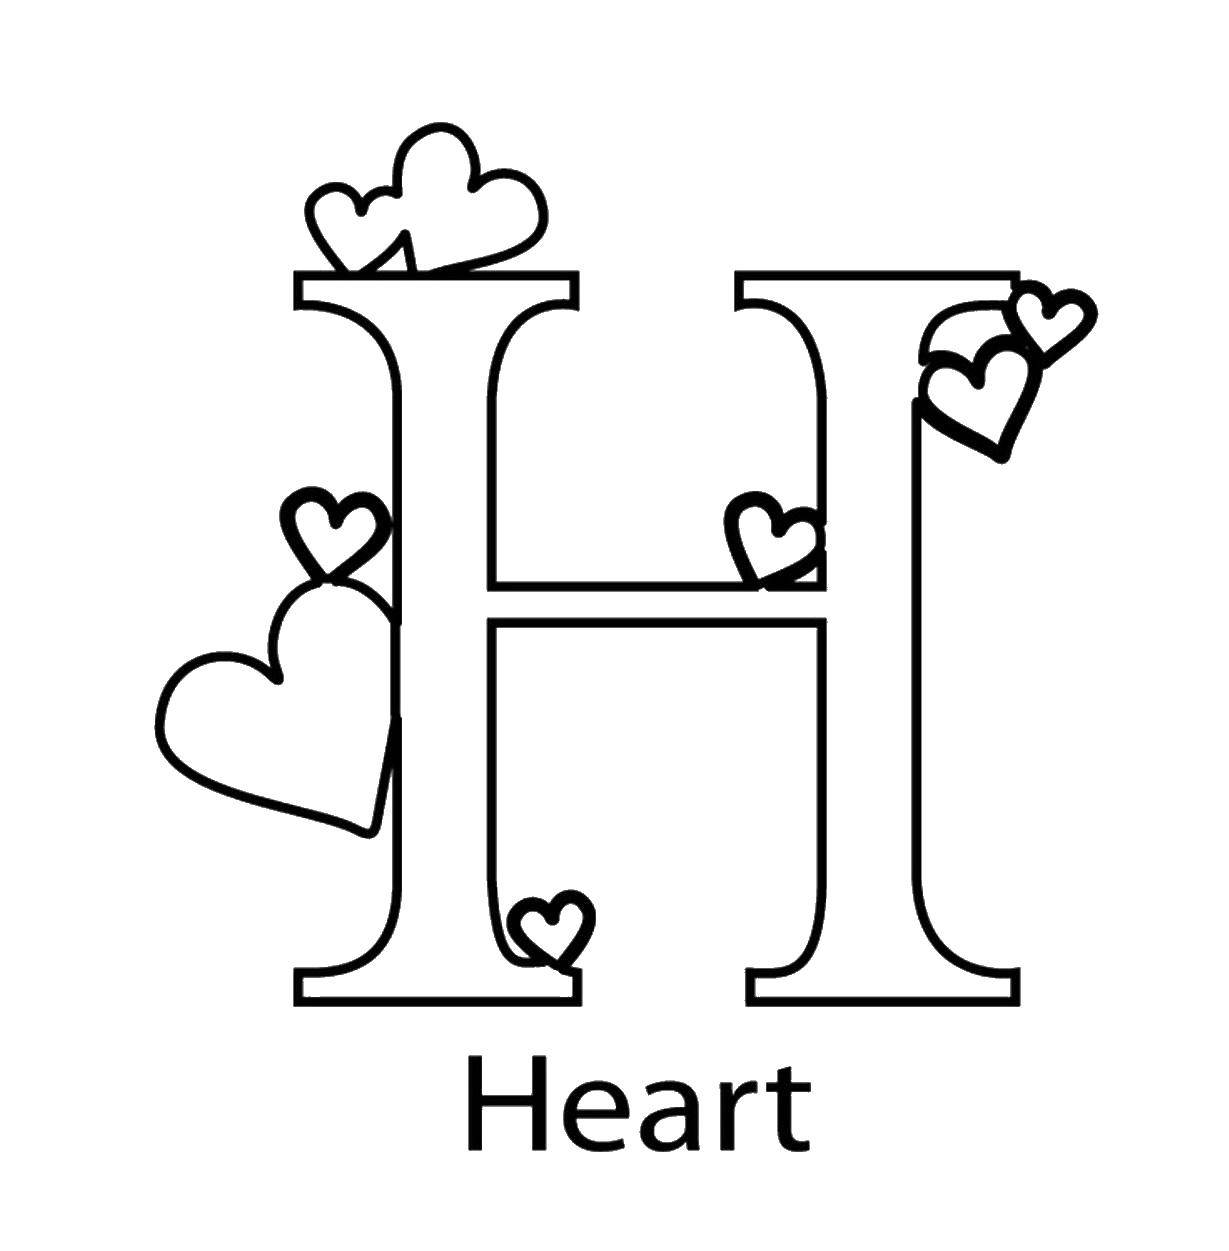 Coloring Letter h heart. Category I love you. Tags:  heart, letter, N.